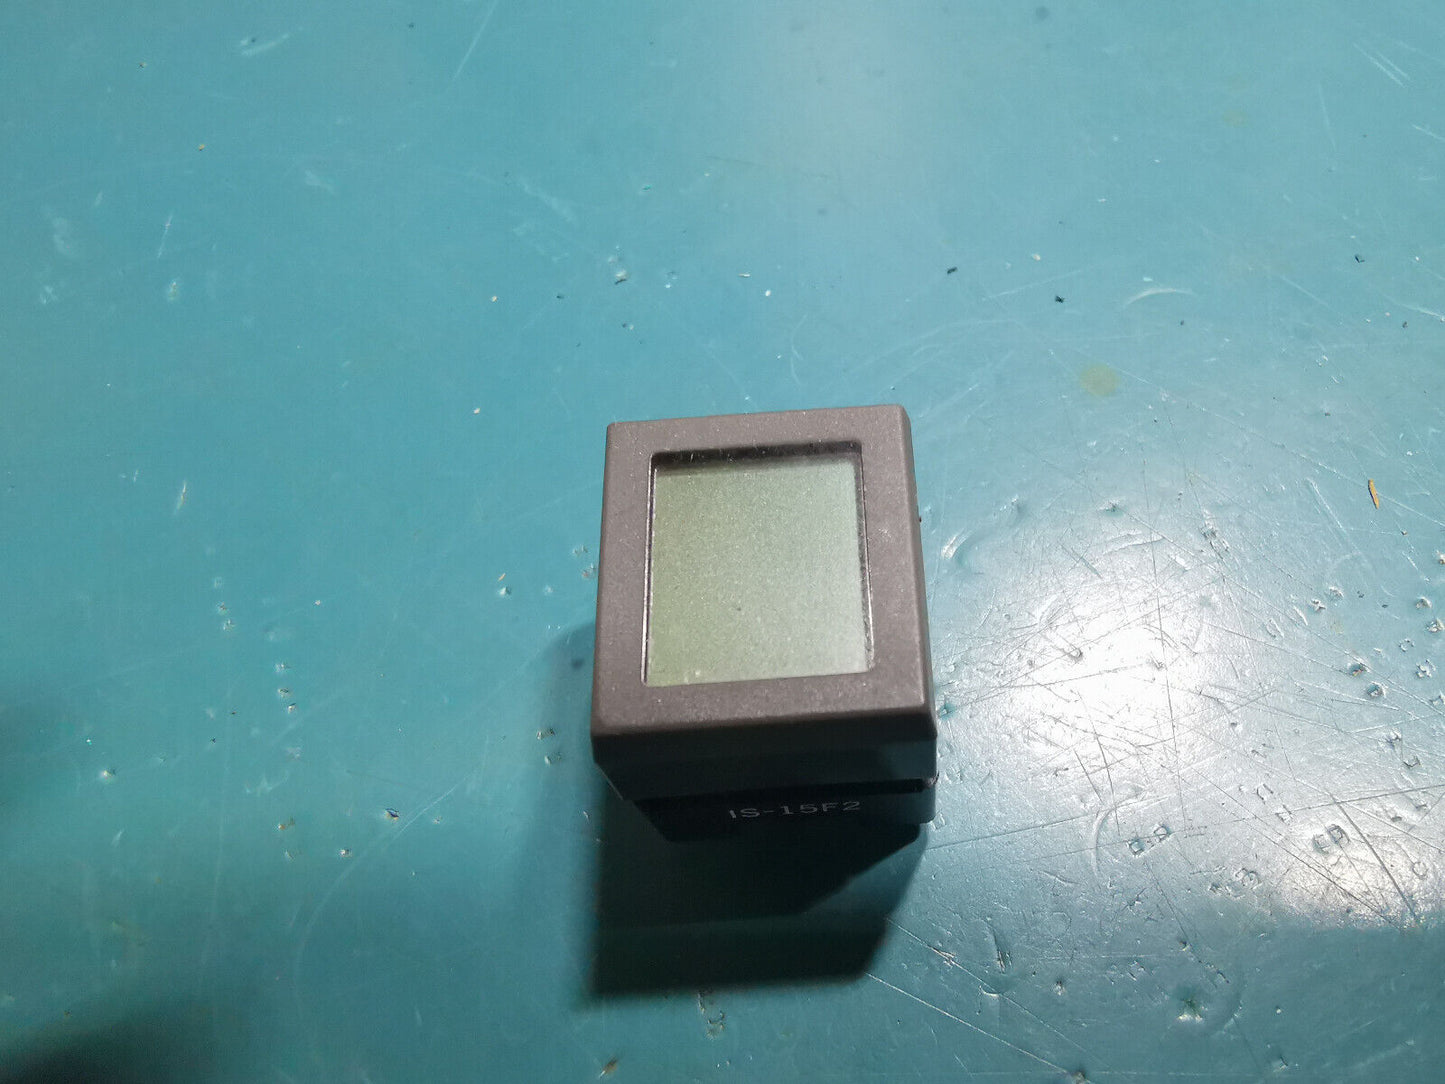 NKK LCD Pushbutton And Display